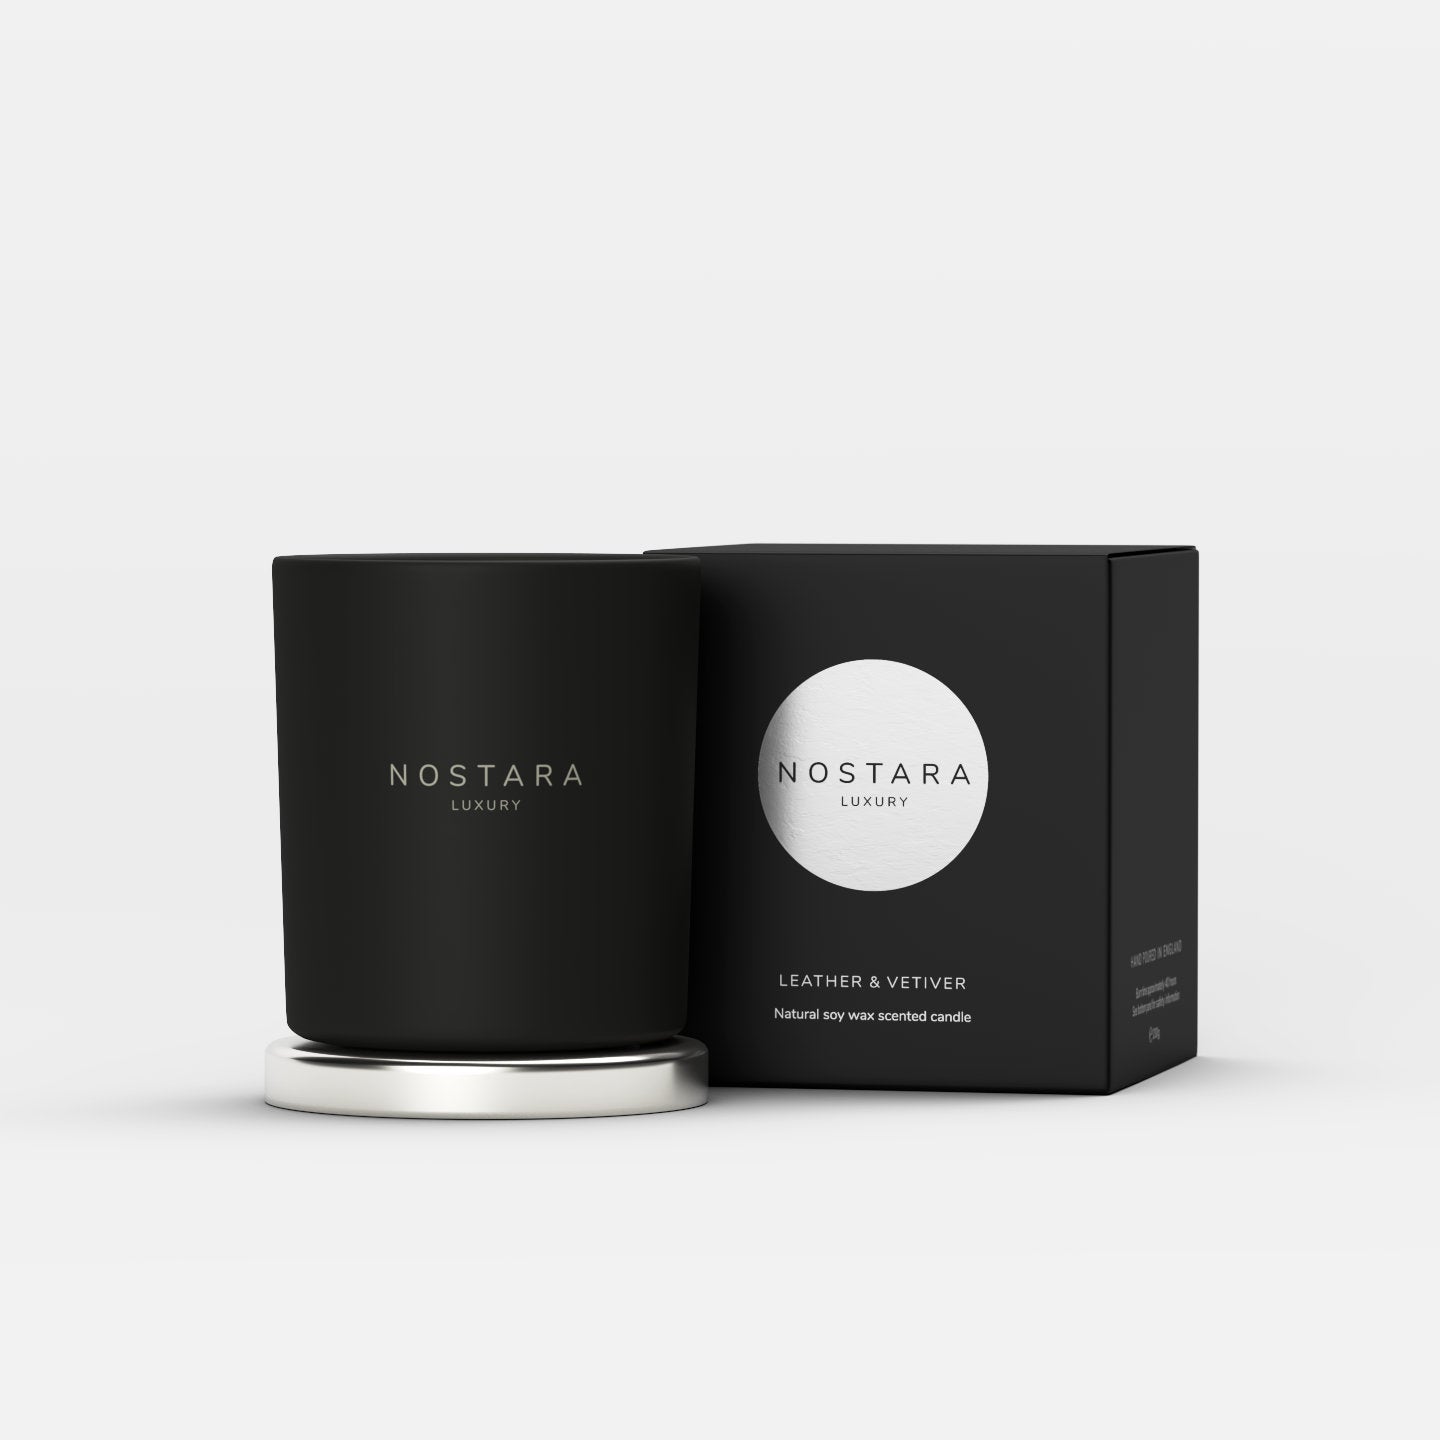 Nostara Leather & Vetiver Scented Candle & Box Image